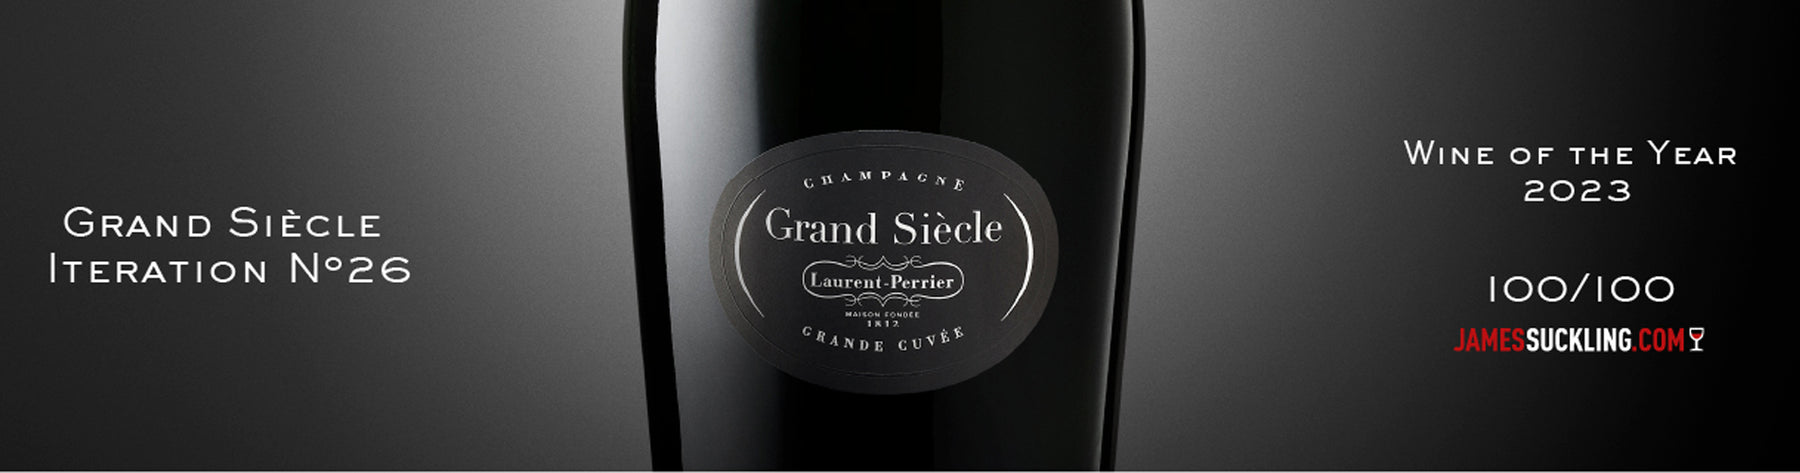 Grand Siècle No. 26 as the #1 Wine of the Year